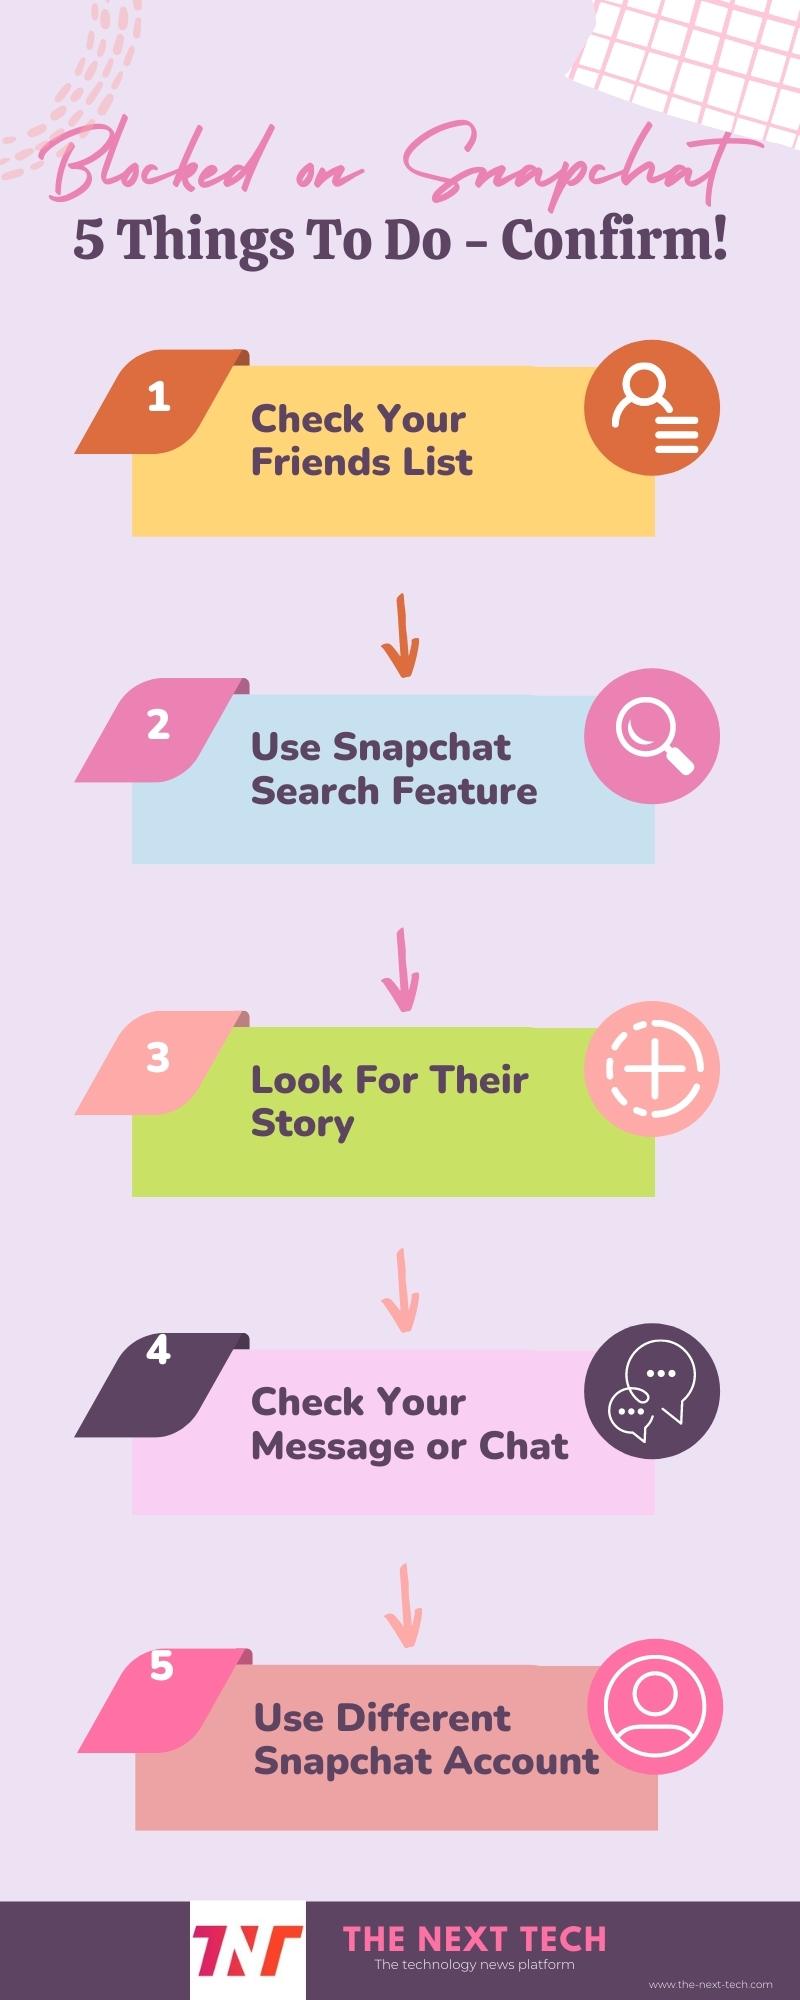 5 things to do when blocked on snapchat